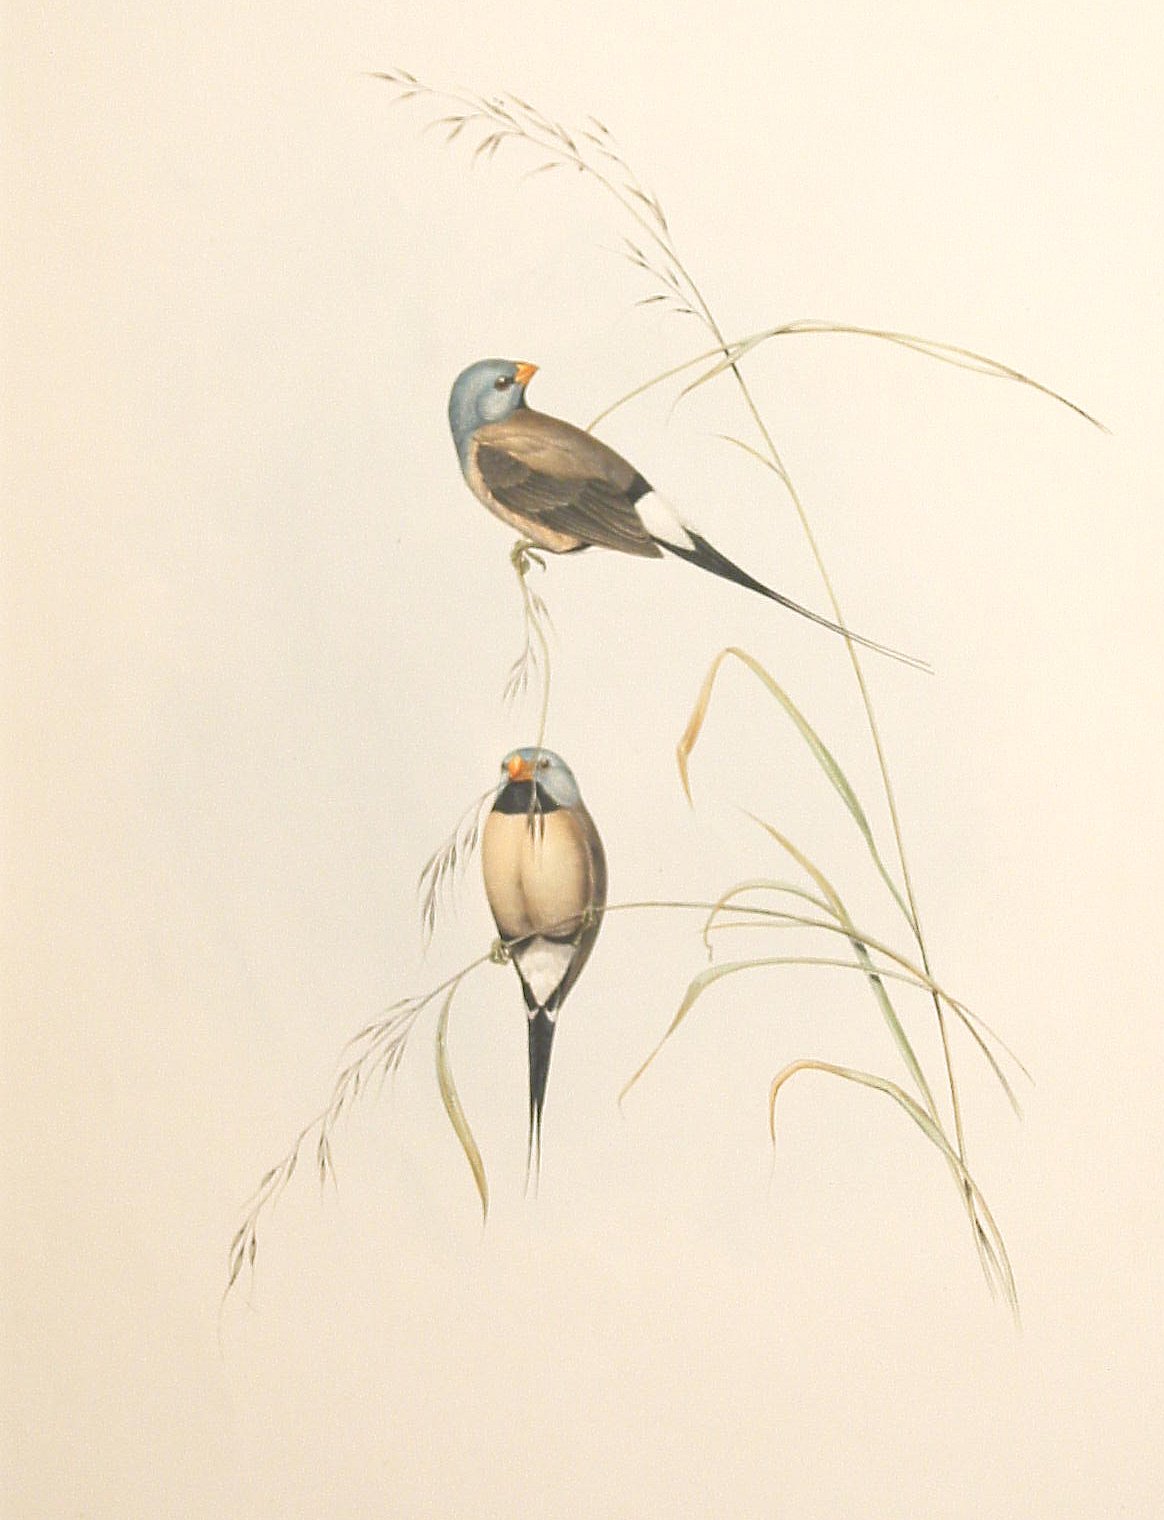 Long-tailed Finch - Antique Print from 1848